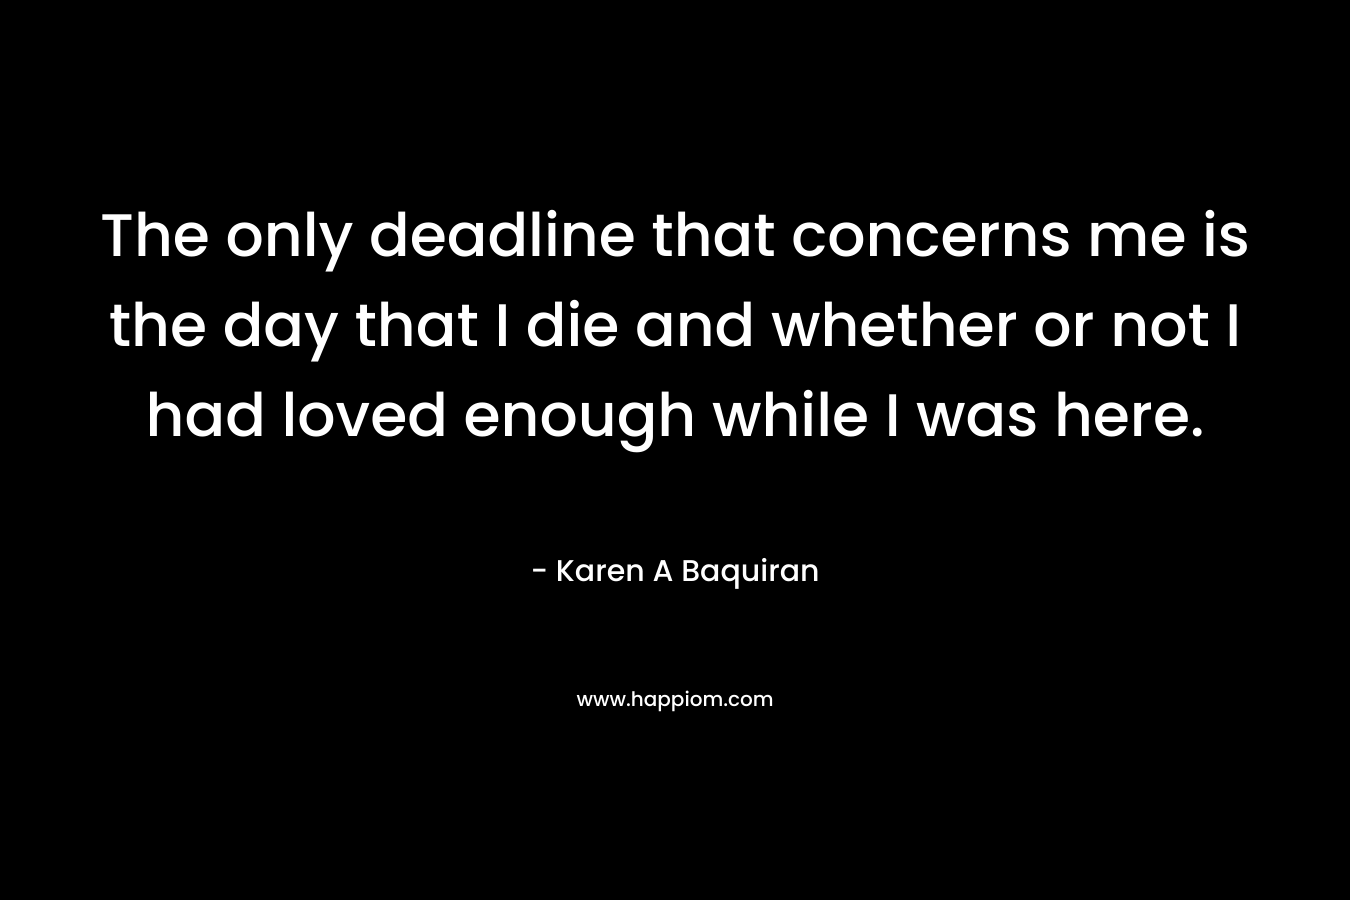 The only deadline that concerns me is the day that I die and whether or not I had loved enough while I was here. – Karen A Baquiran